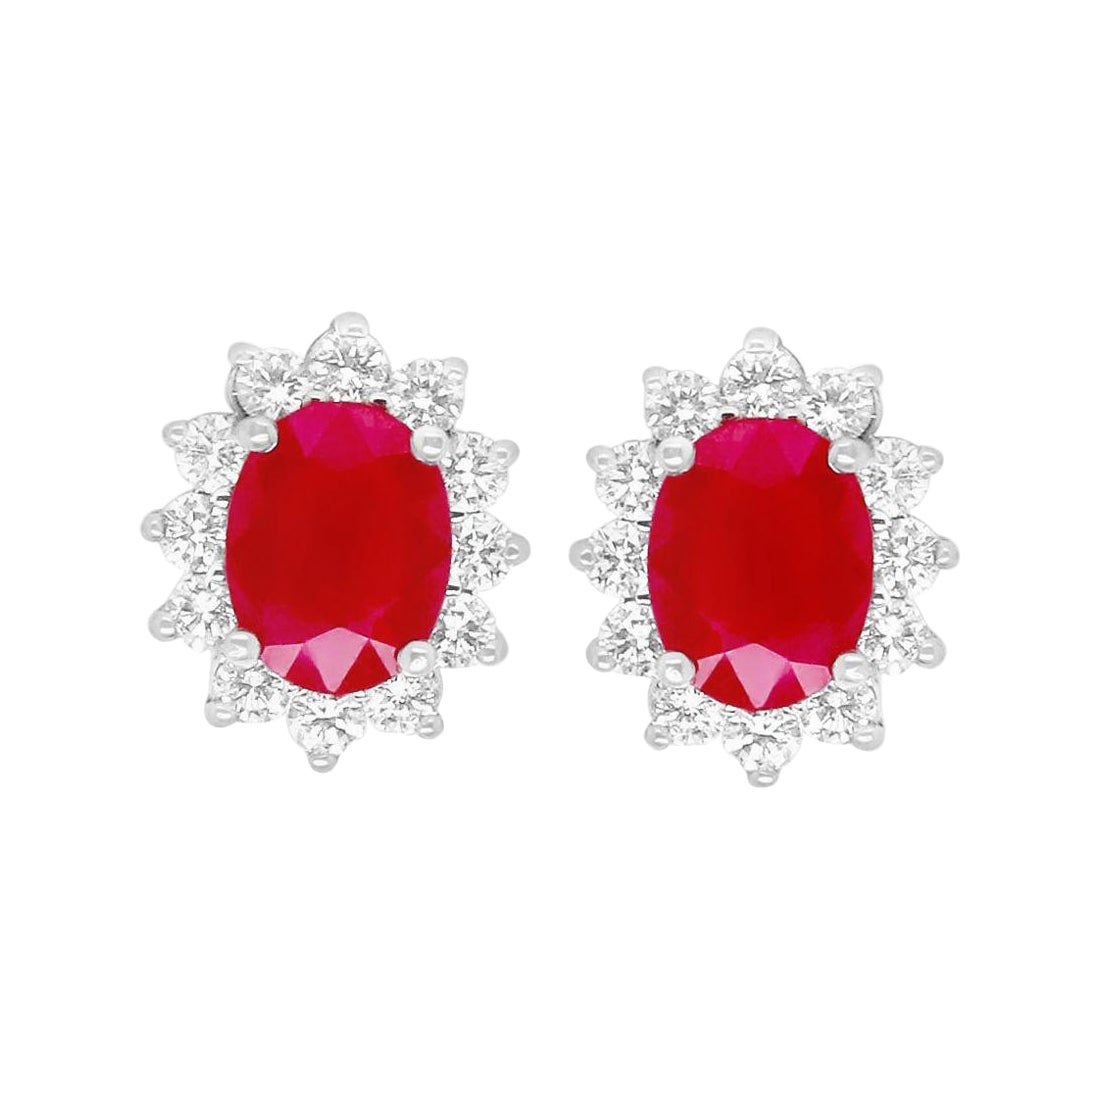 2.75 Carat Oval Ruby and Diamond Halo Stud Earrings 14K White Gold